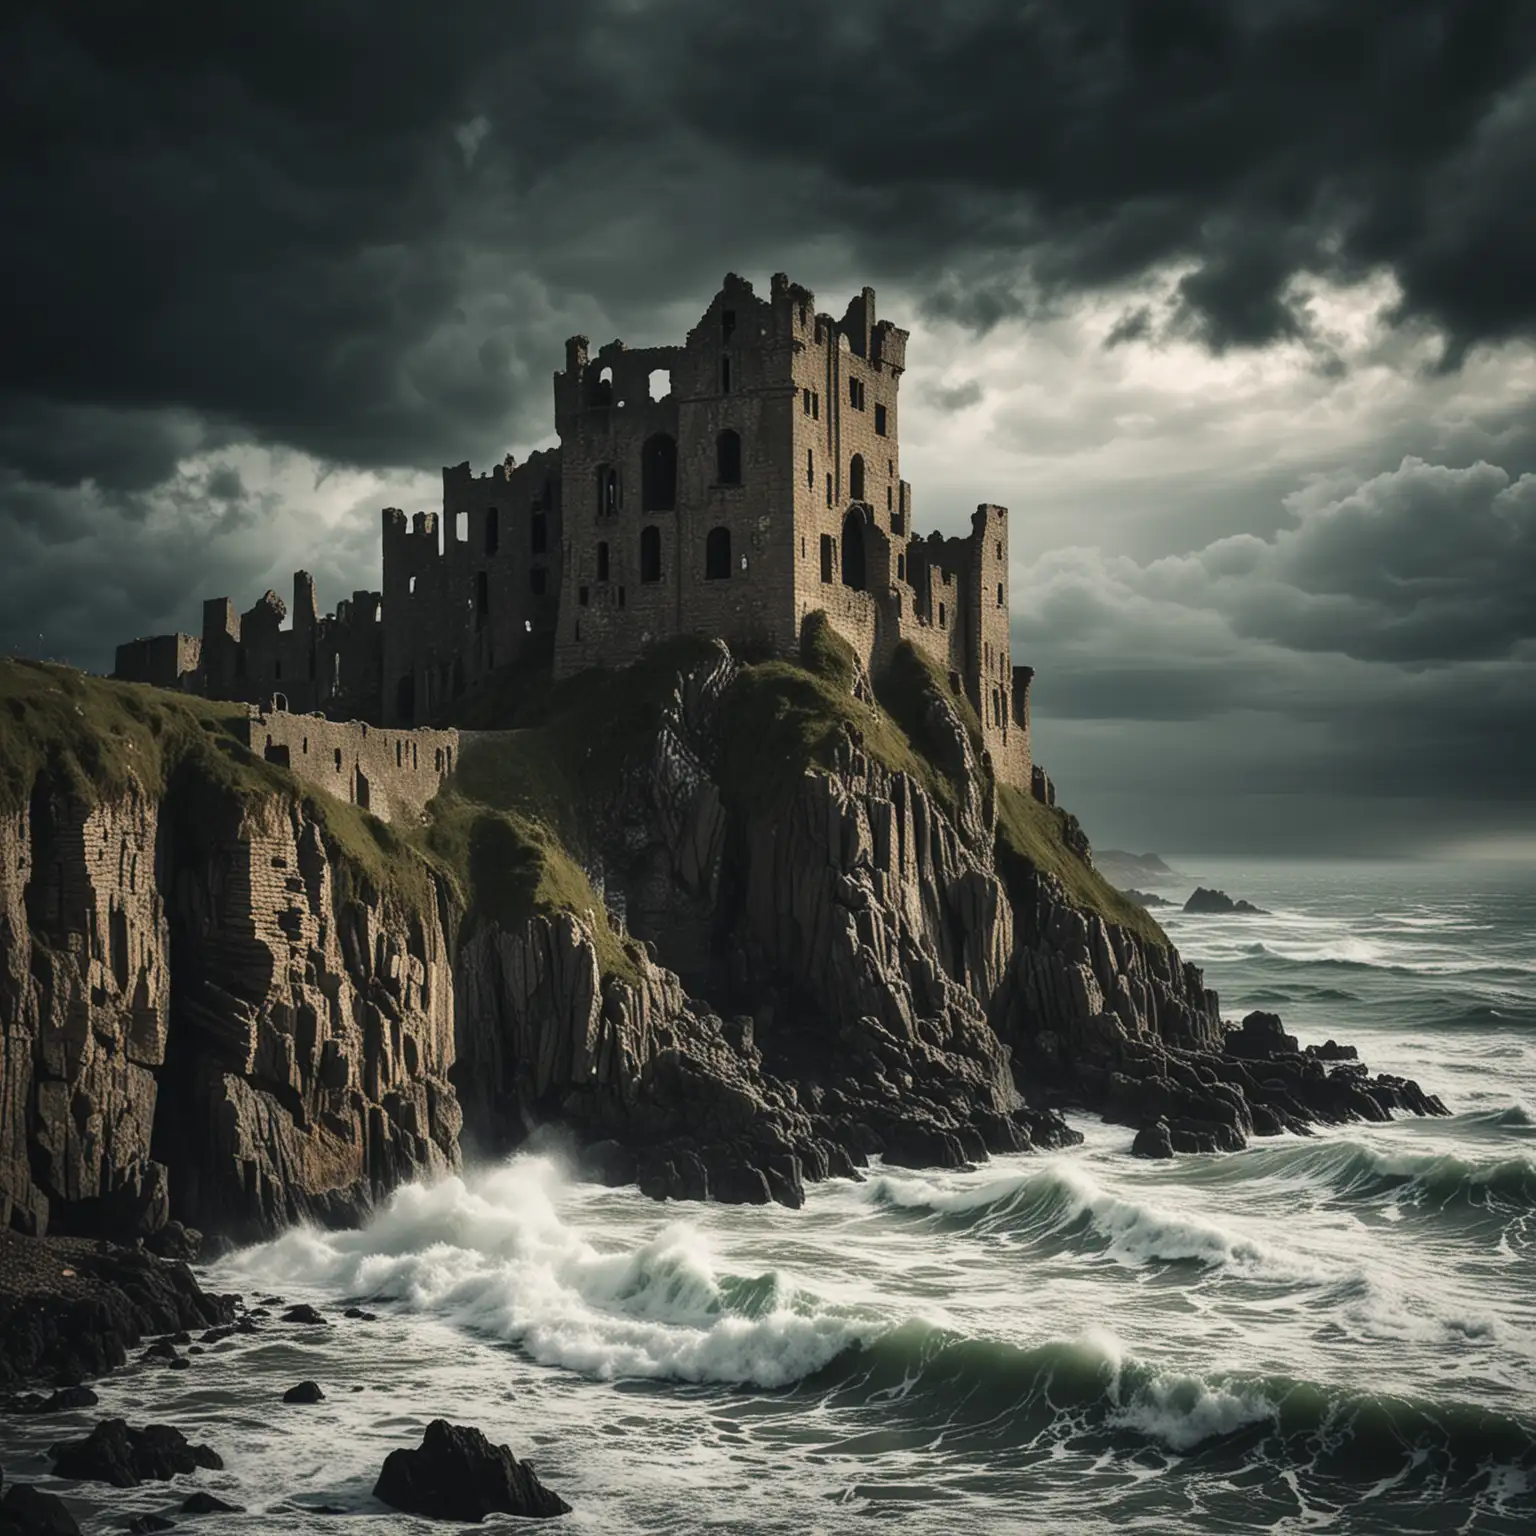 Eerie-Ruined-Castle-on-Cliff-Overlooking-Stormy-Sea